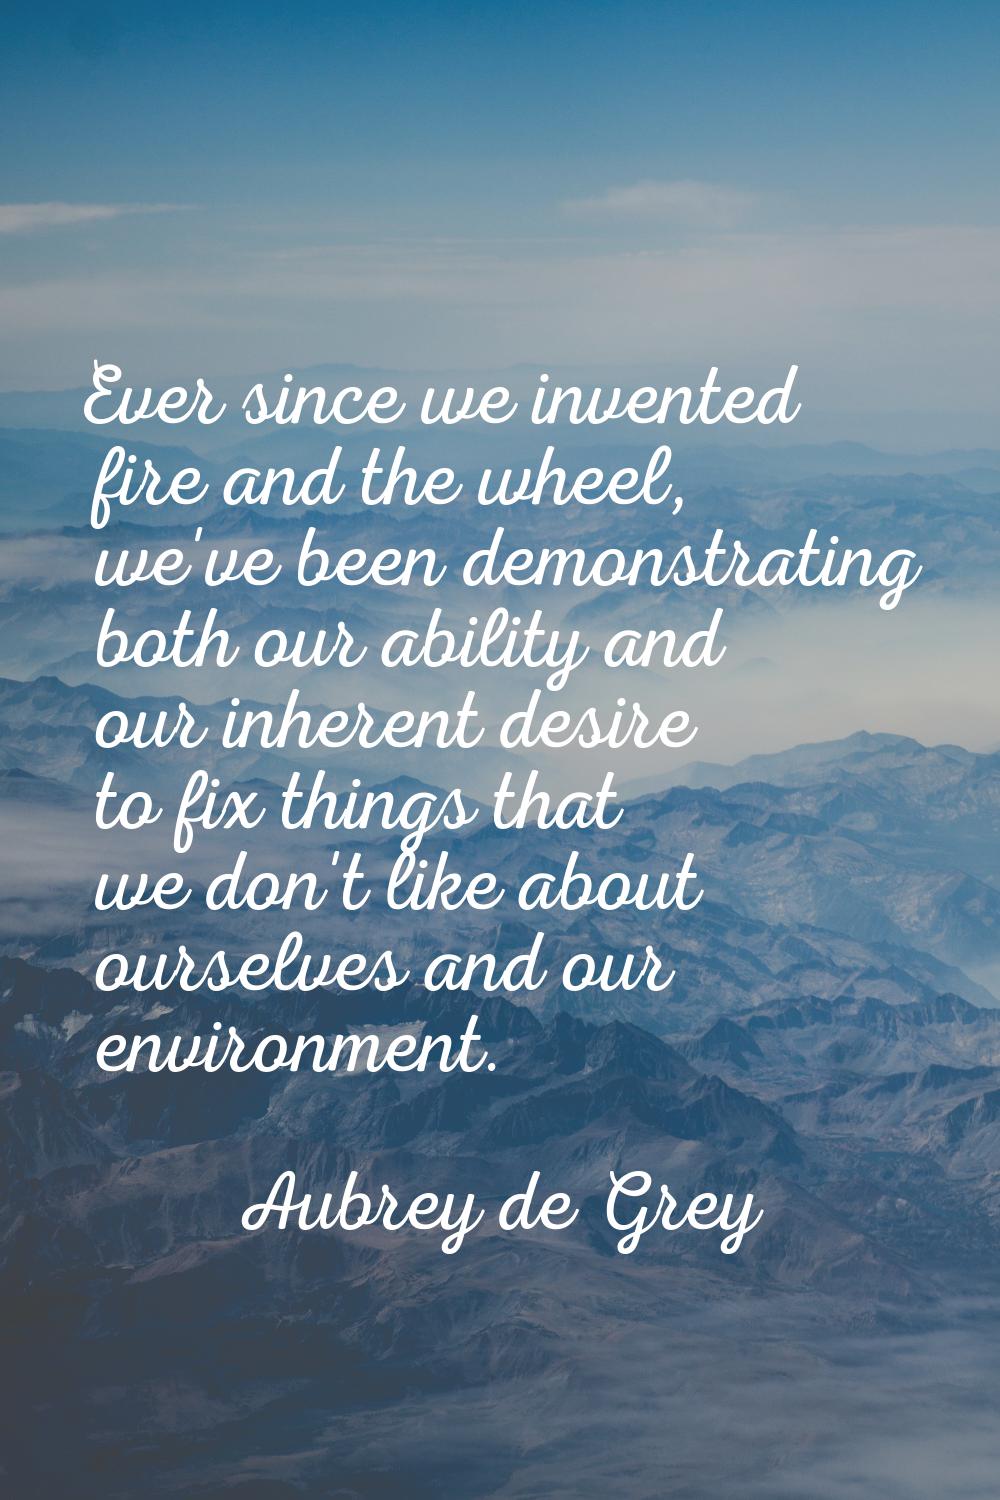 Ever since we invented fire and the wheel, we've been demonstrating both our ability and our inhere